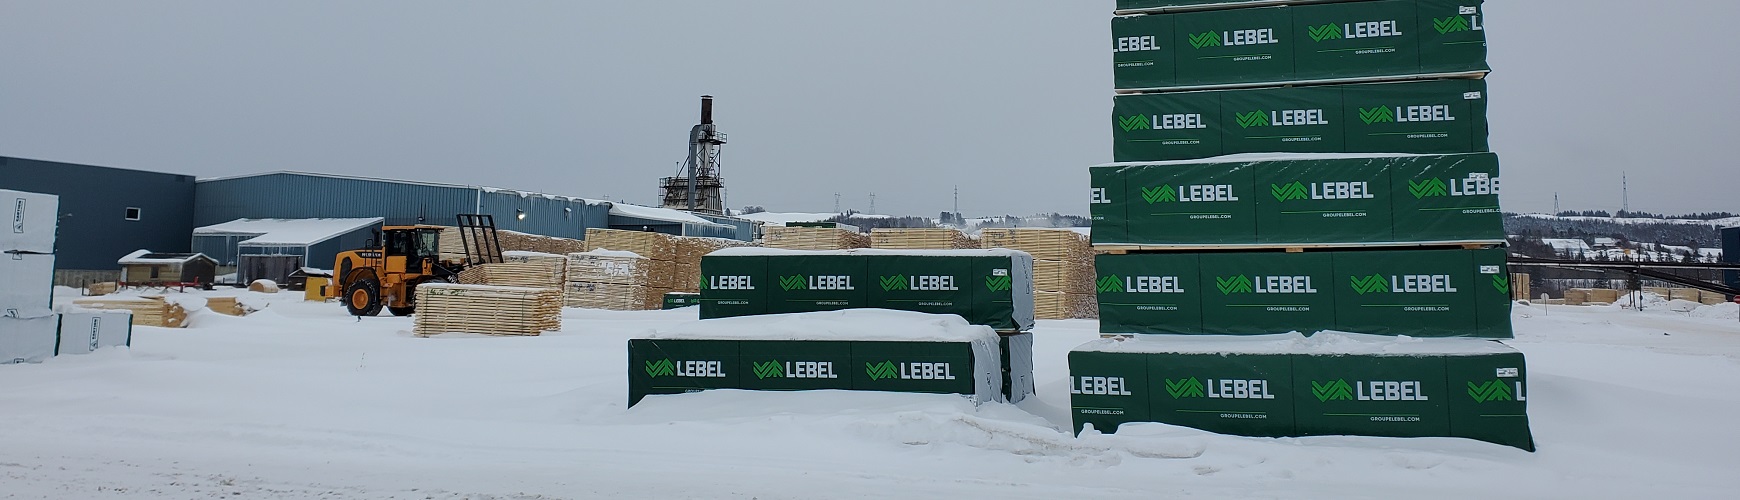 Our plants - Groupe Lebel inc.